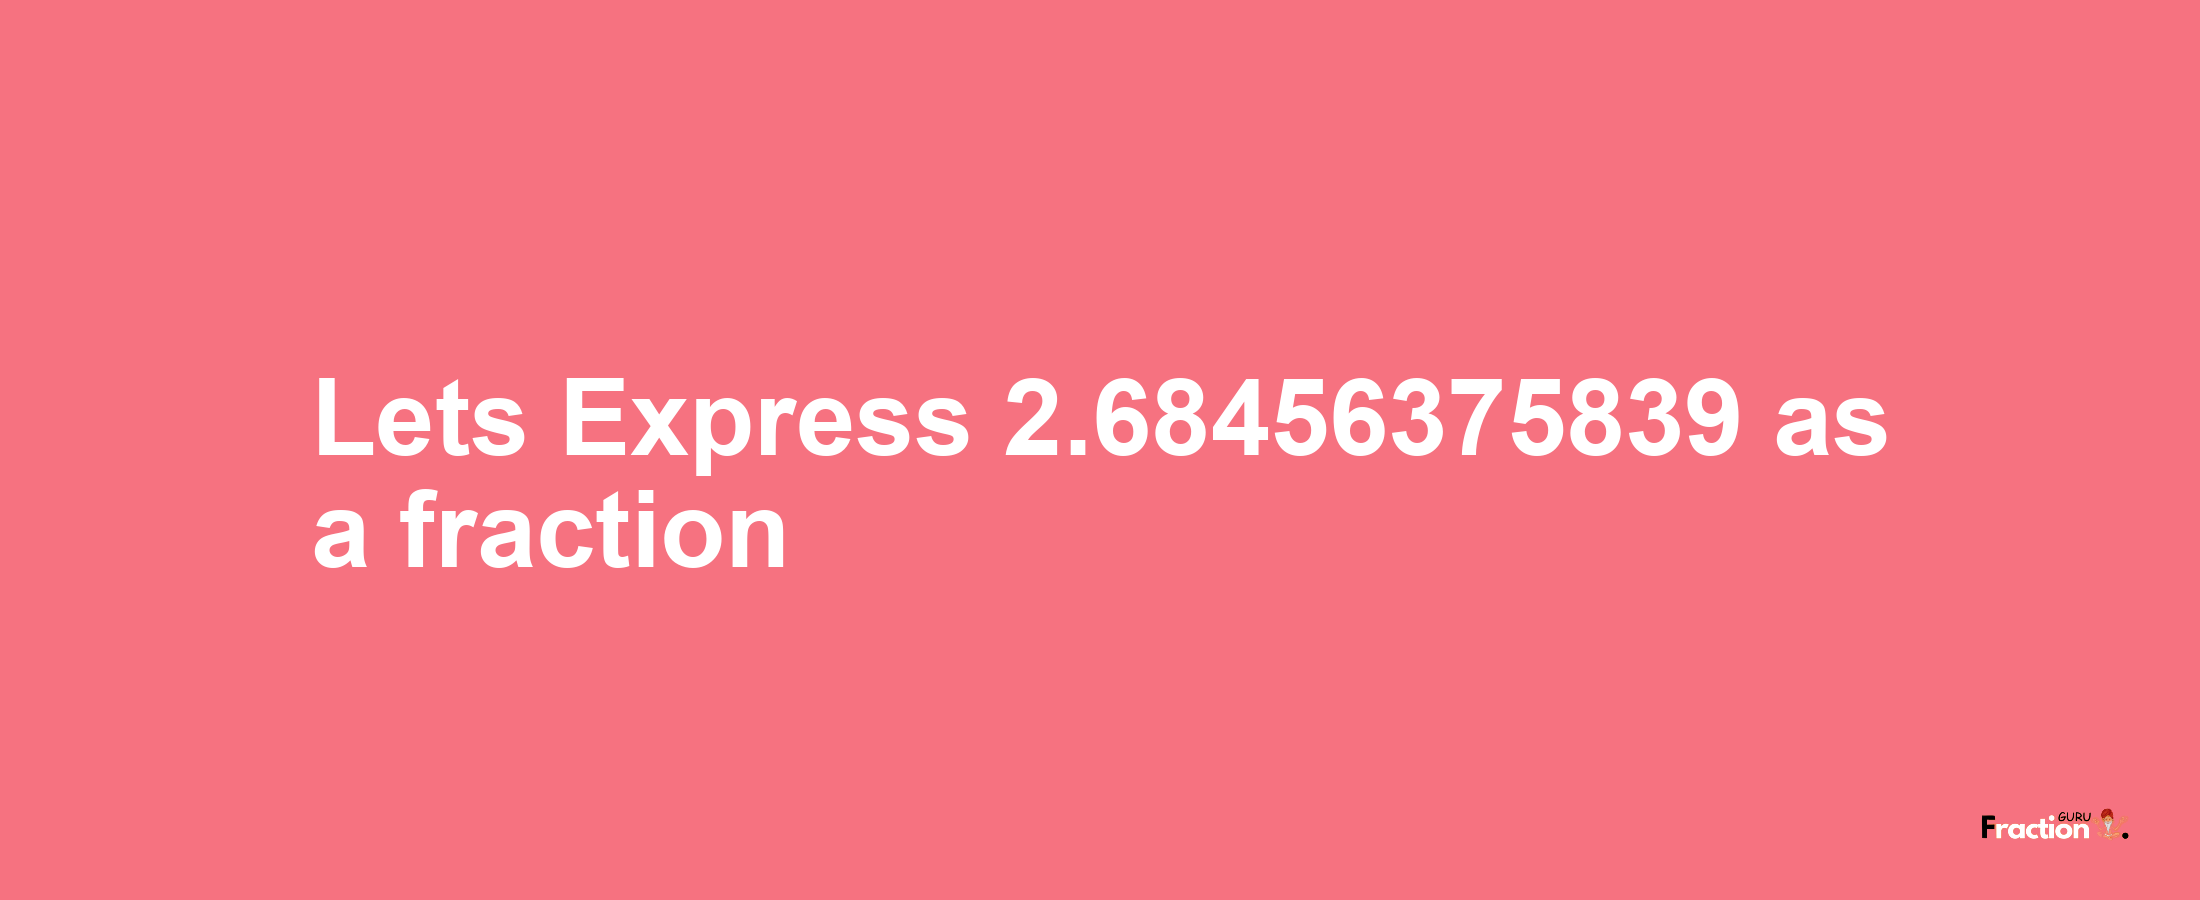 Lets Express 2.68456375839 as afraction